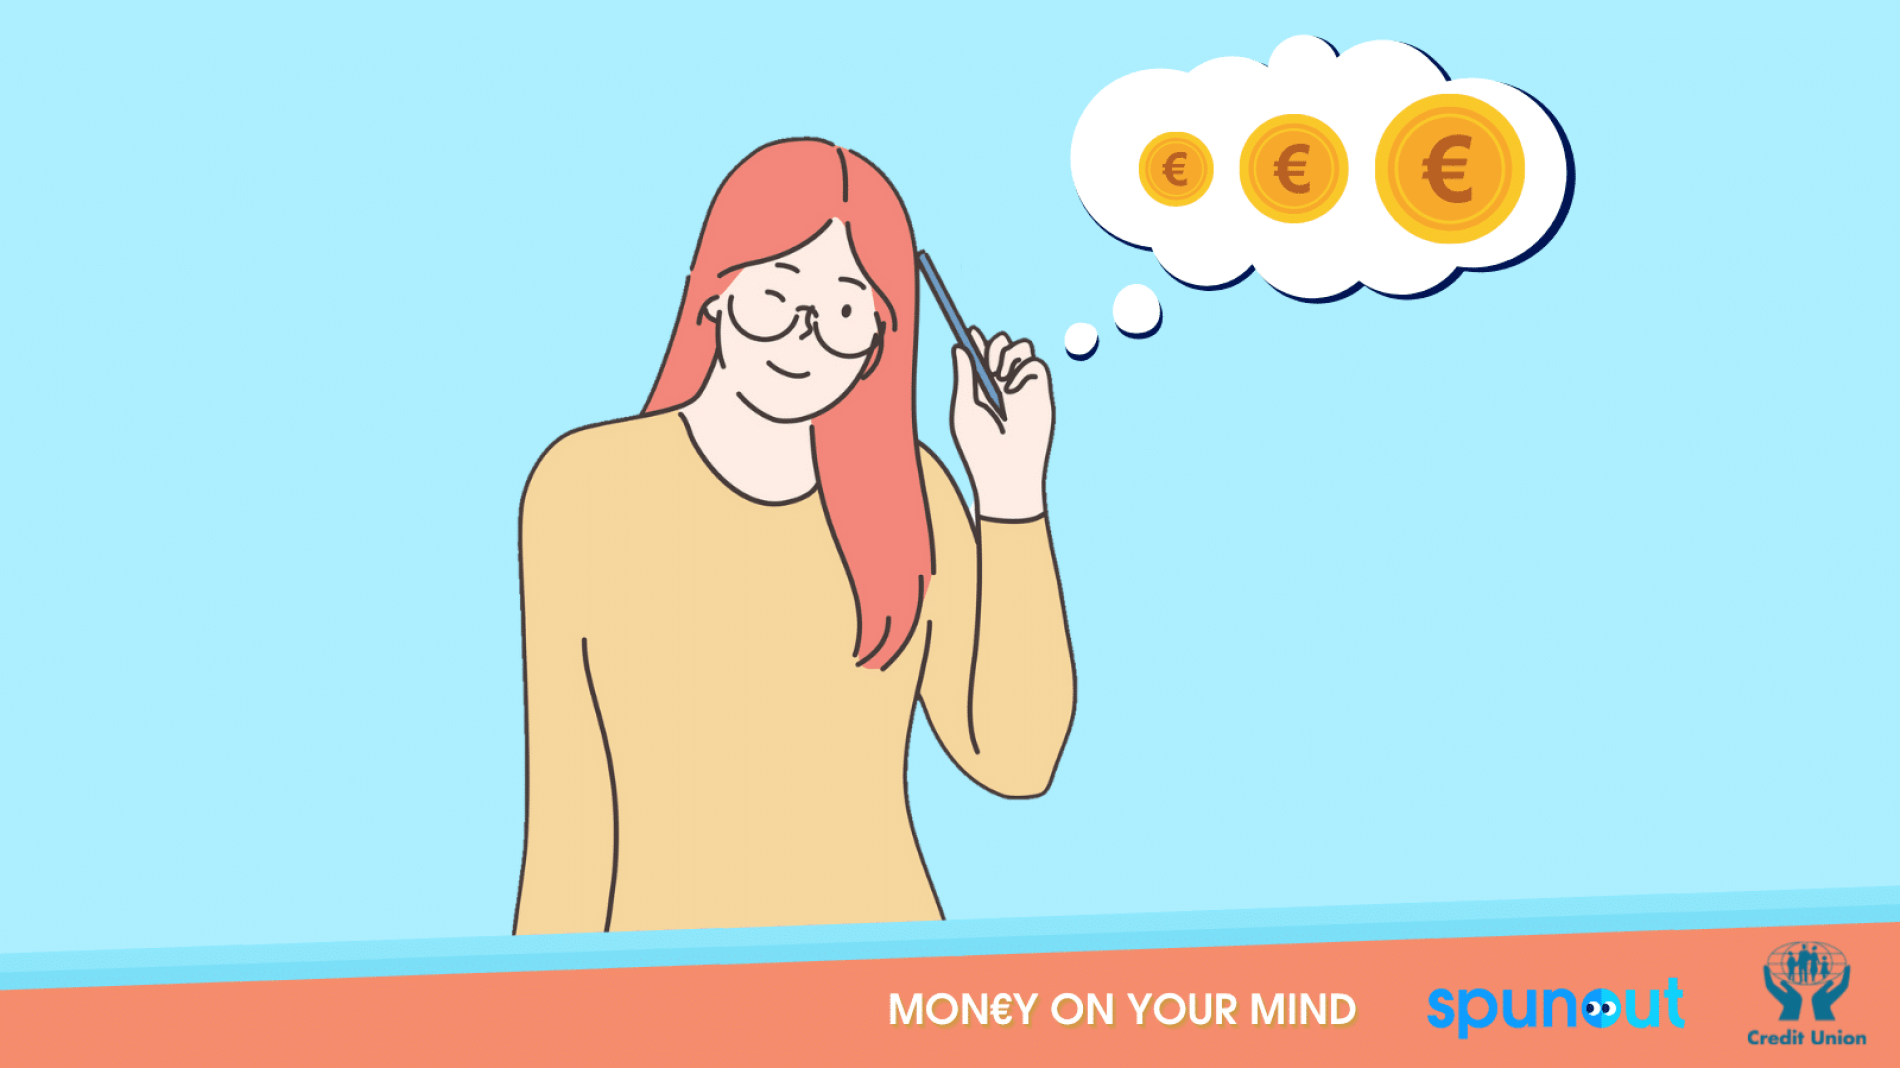 Illustration of a person with a thought bubble thinking about money